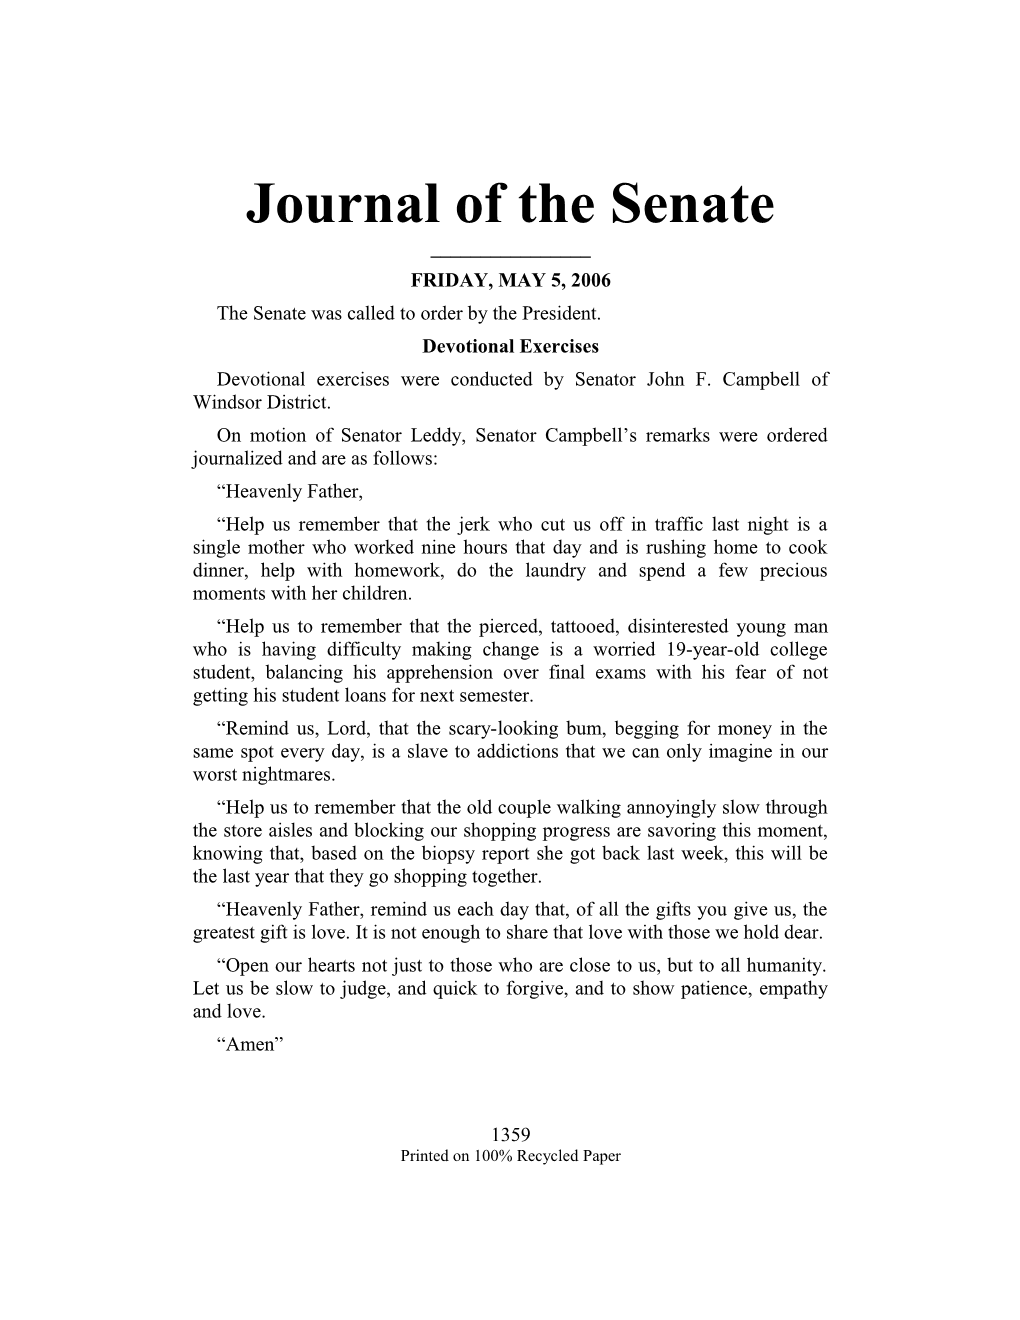 The Senate Was Called to Order by the President